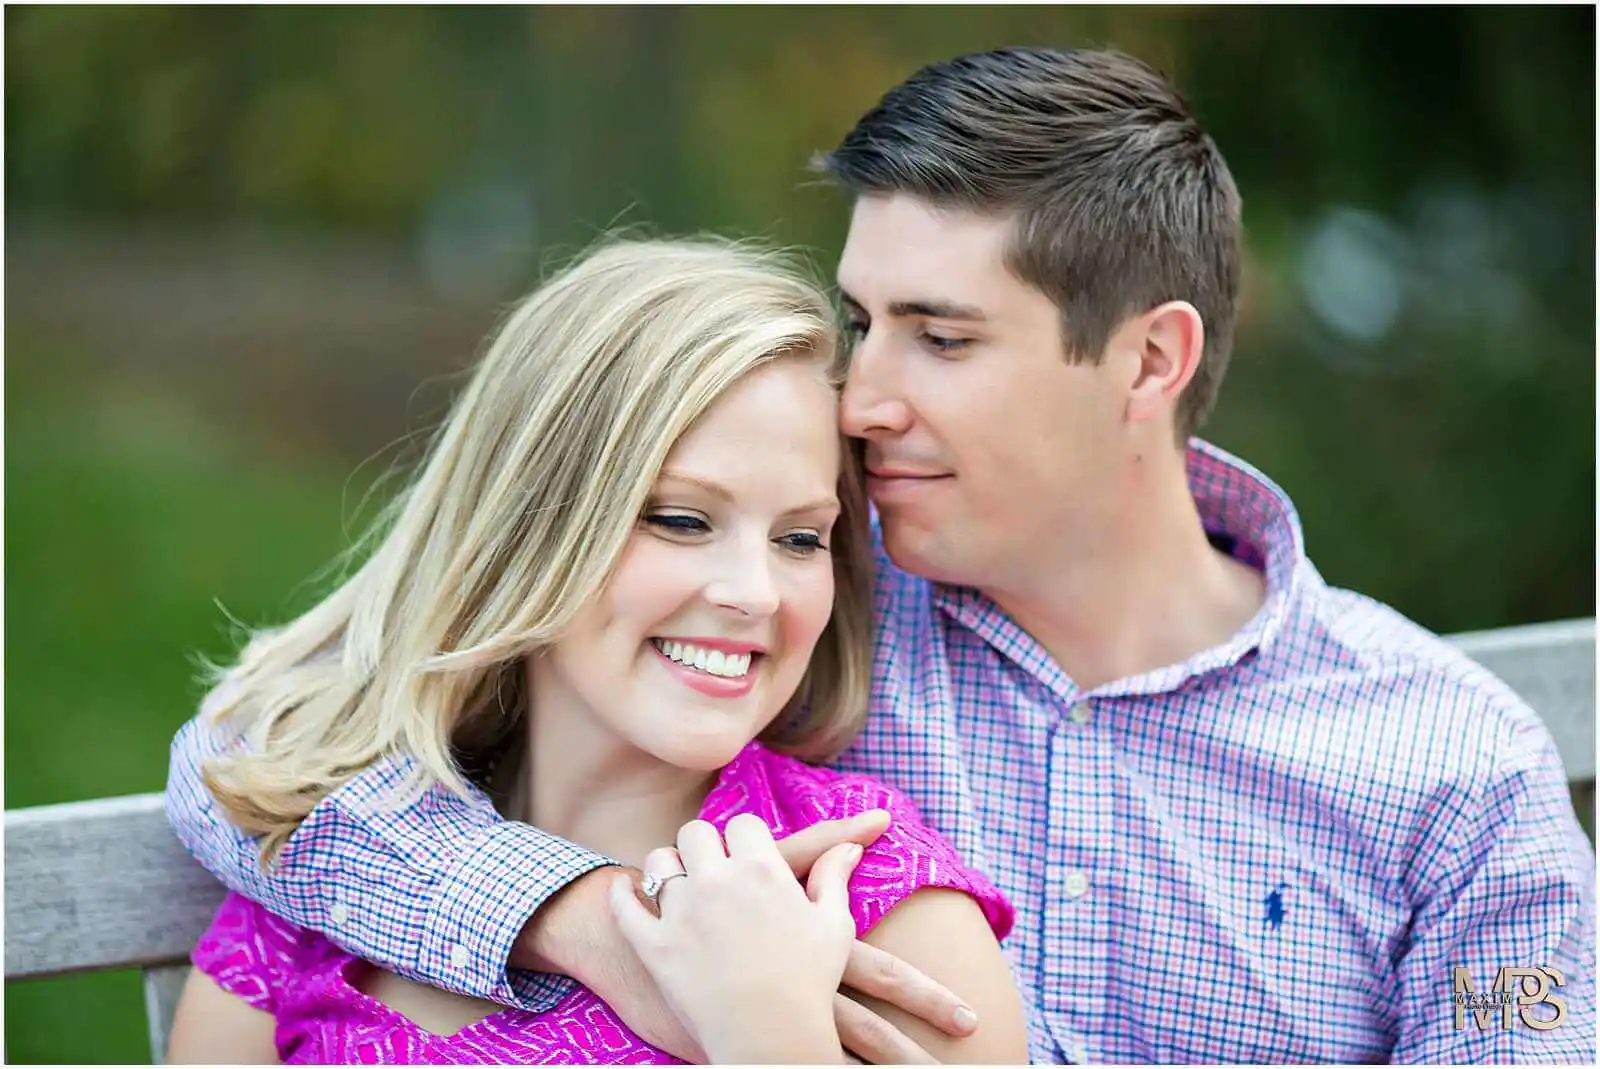 Smiling couple embracing in a romantic outdoor photoshoot.